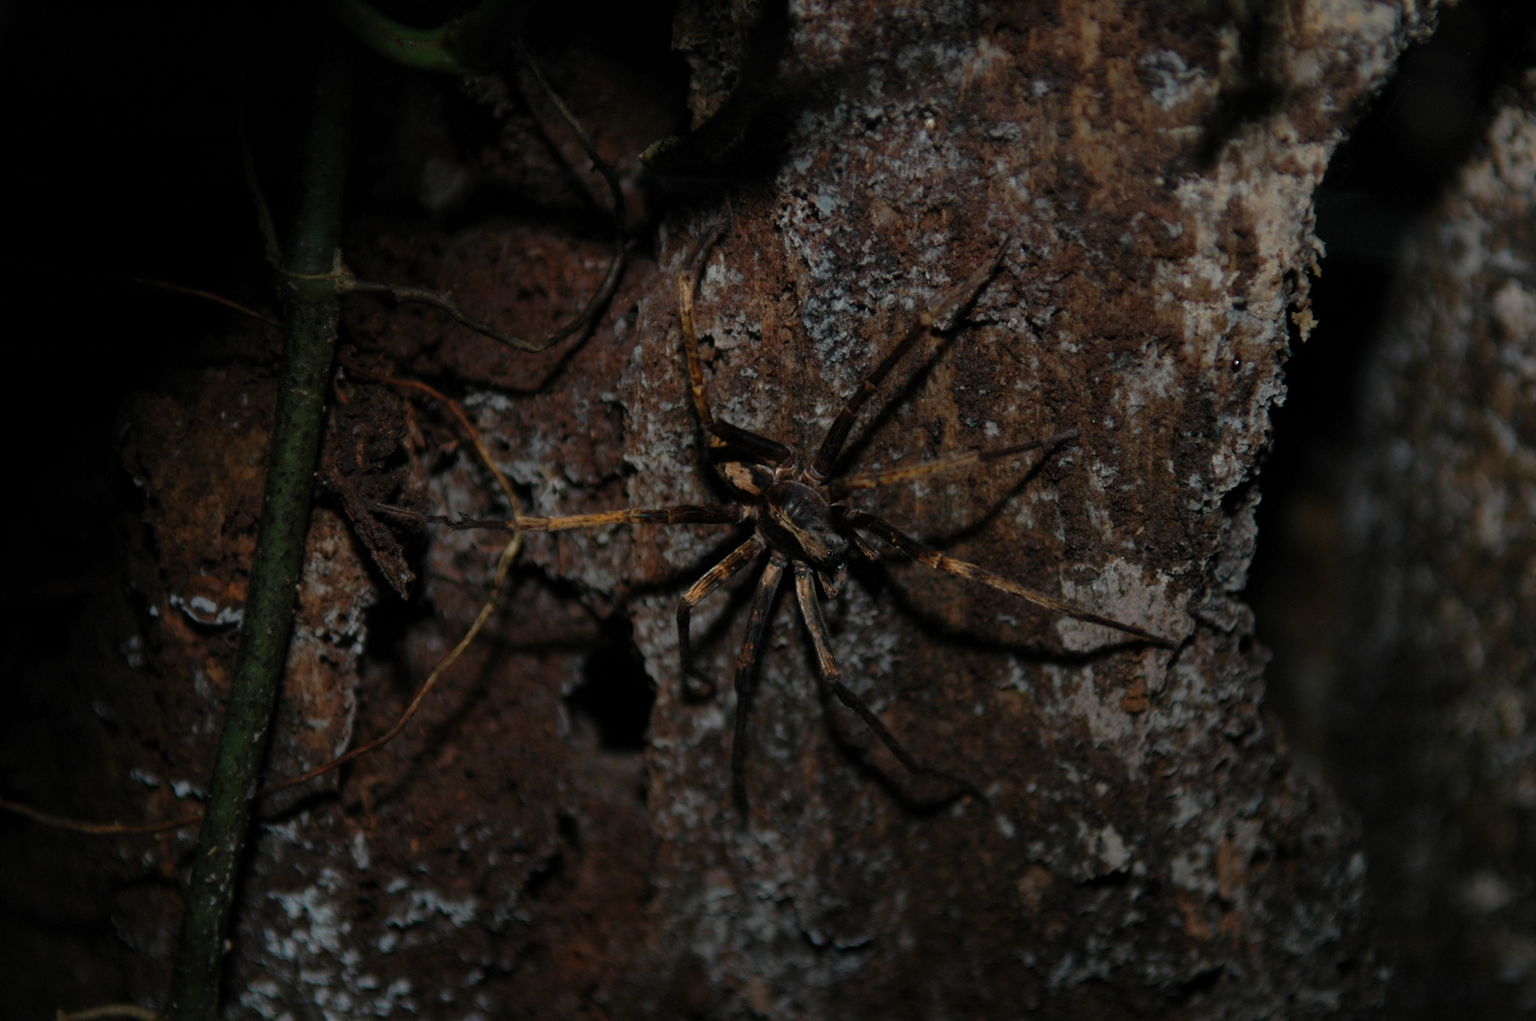 This spider is doing a pretty good job at camouflaging itself.